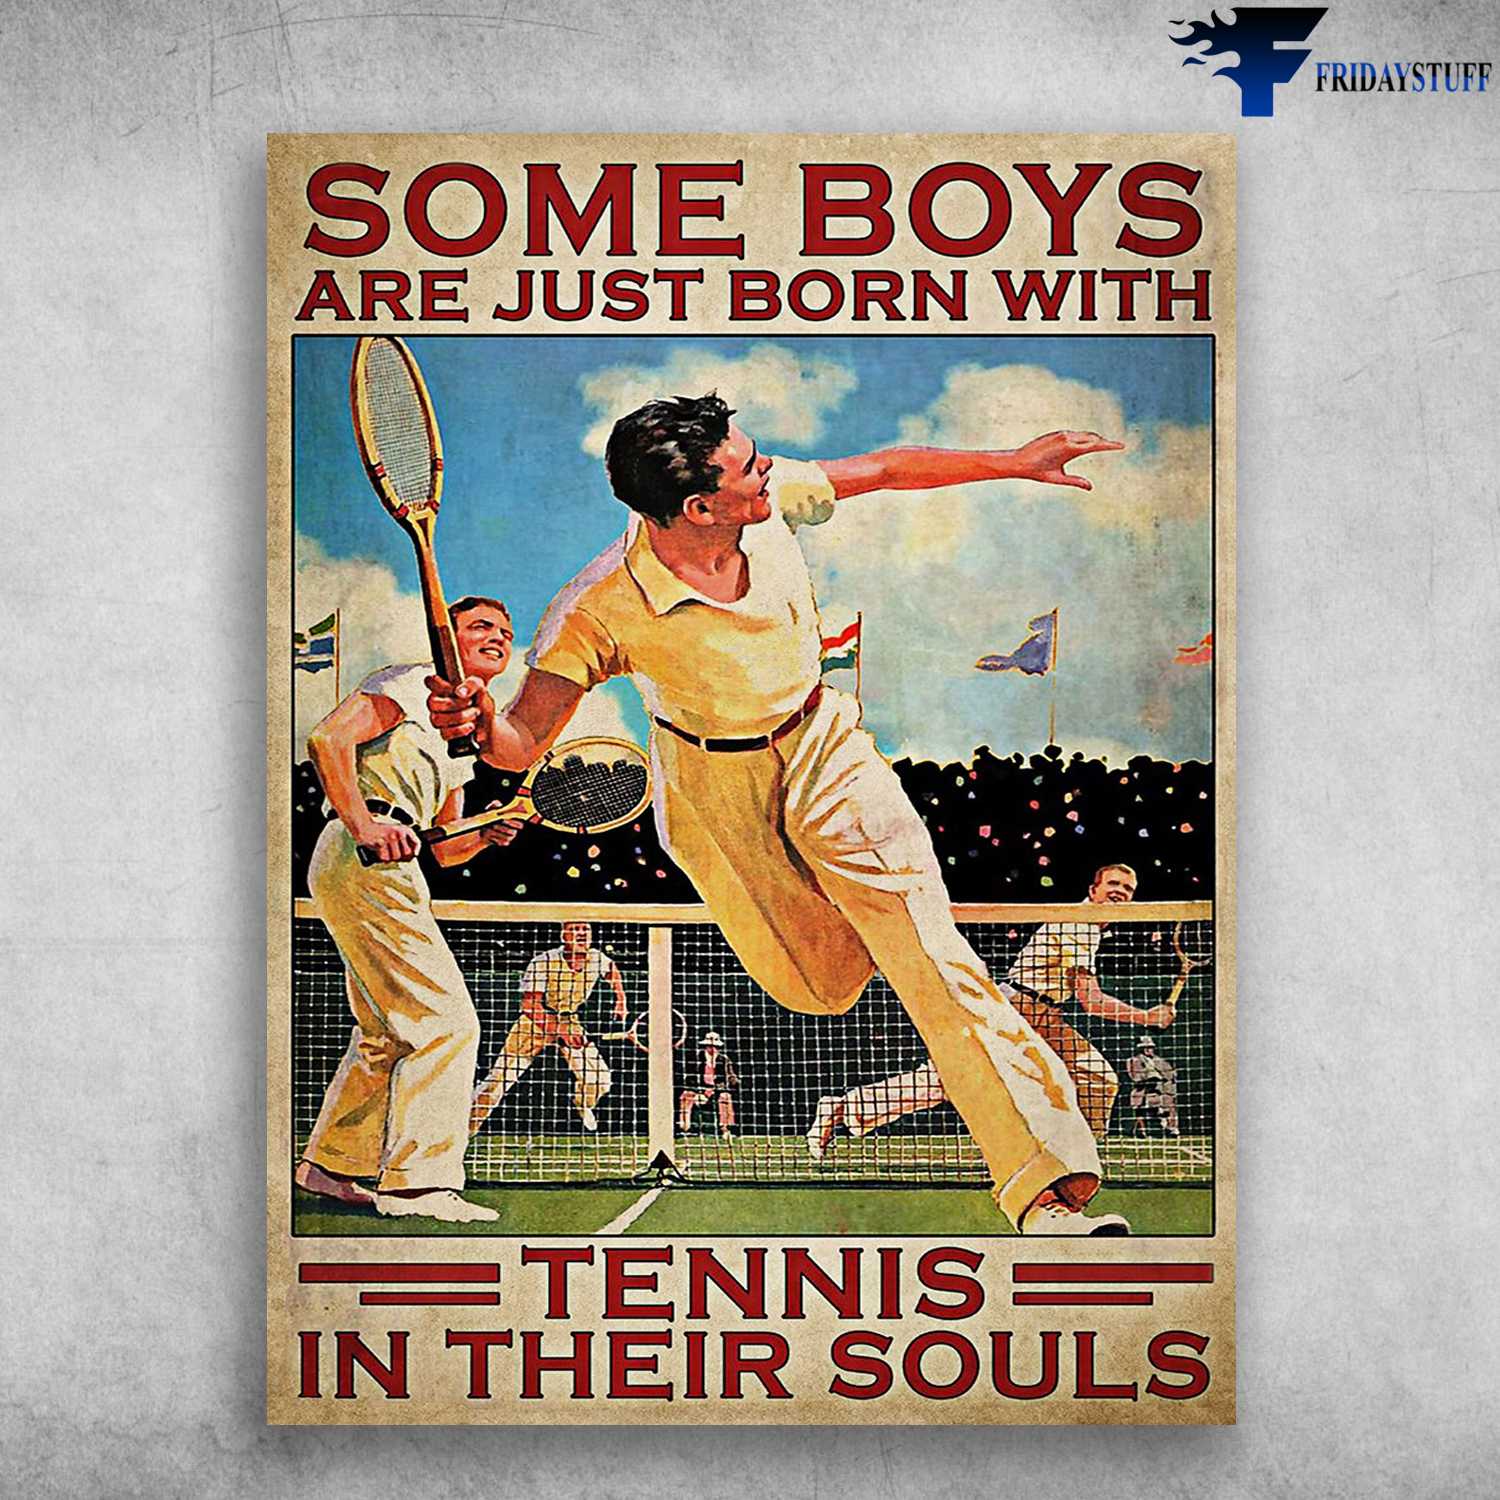 Tennis Player, Tennis Poster - Some Boys Are Just Born With, Tennis In Their Souls